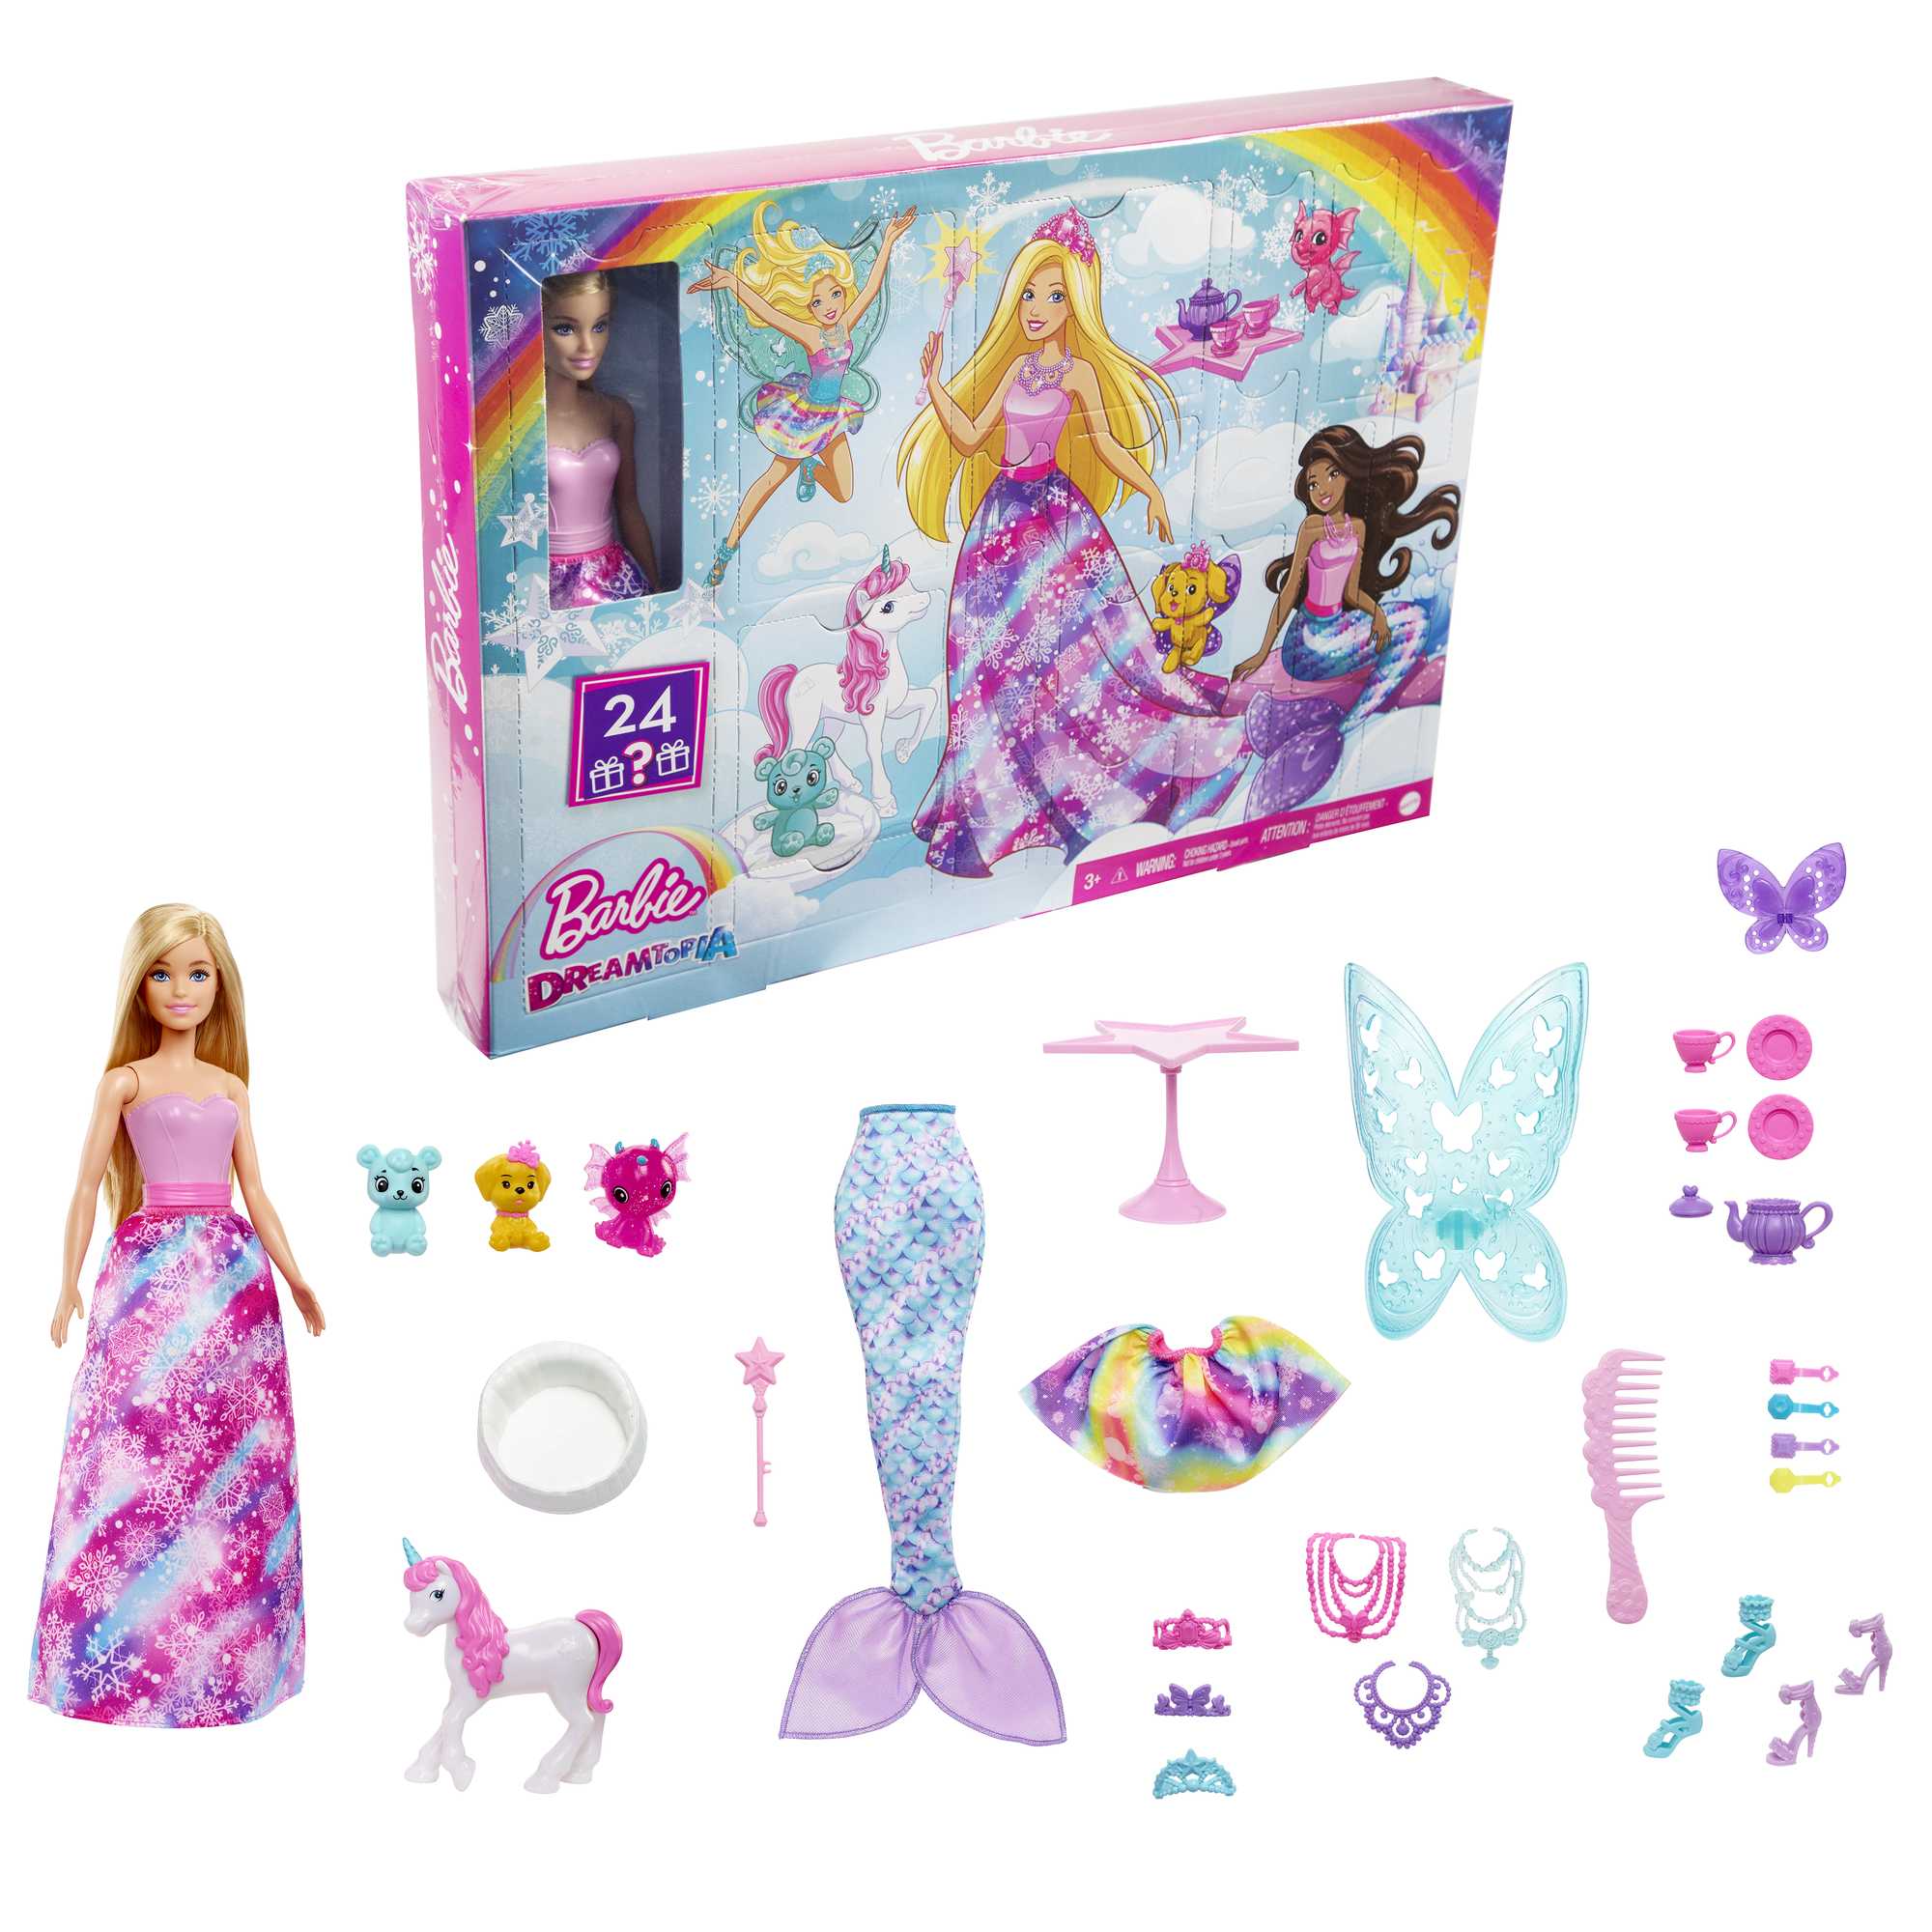 Barbie Dreamtopia Fairytale Surprise Box With Barbie Doll And 24 Gifts